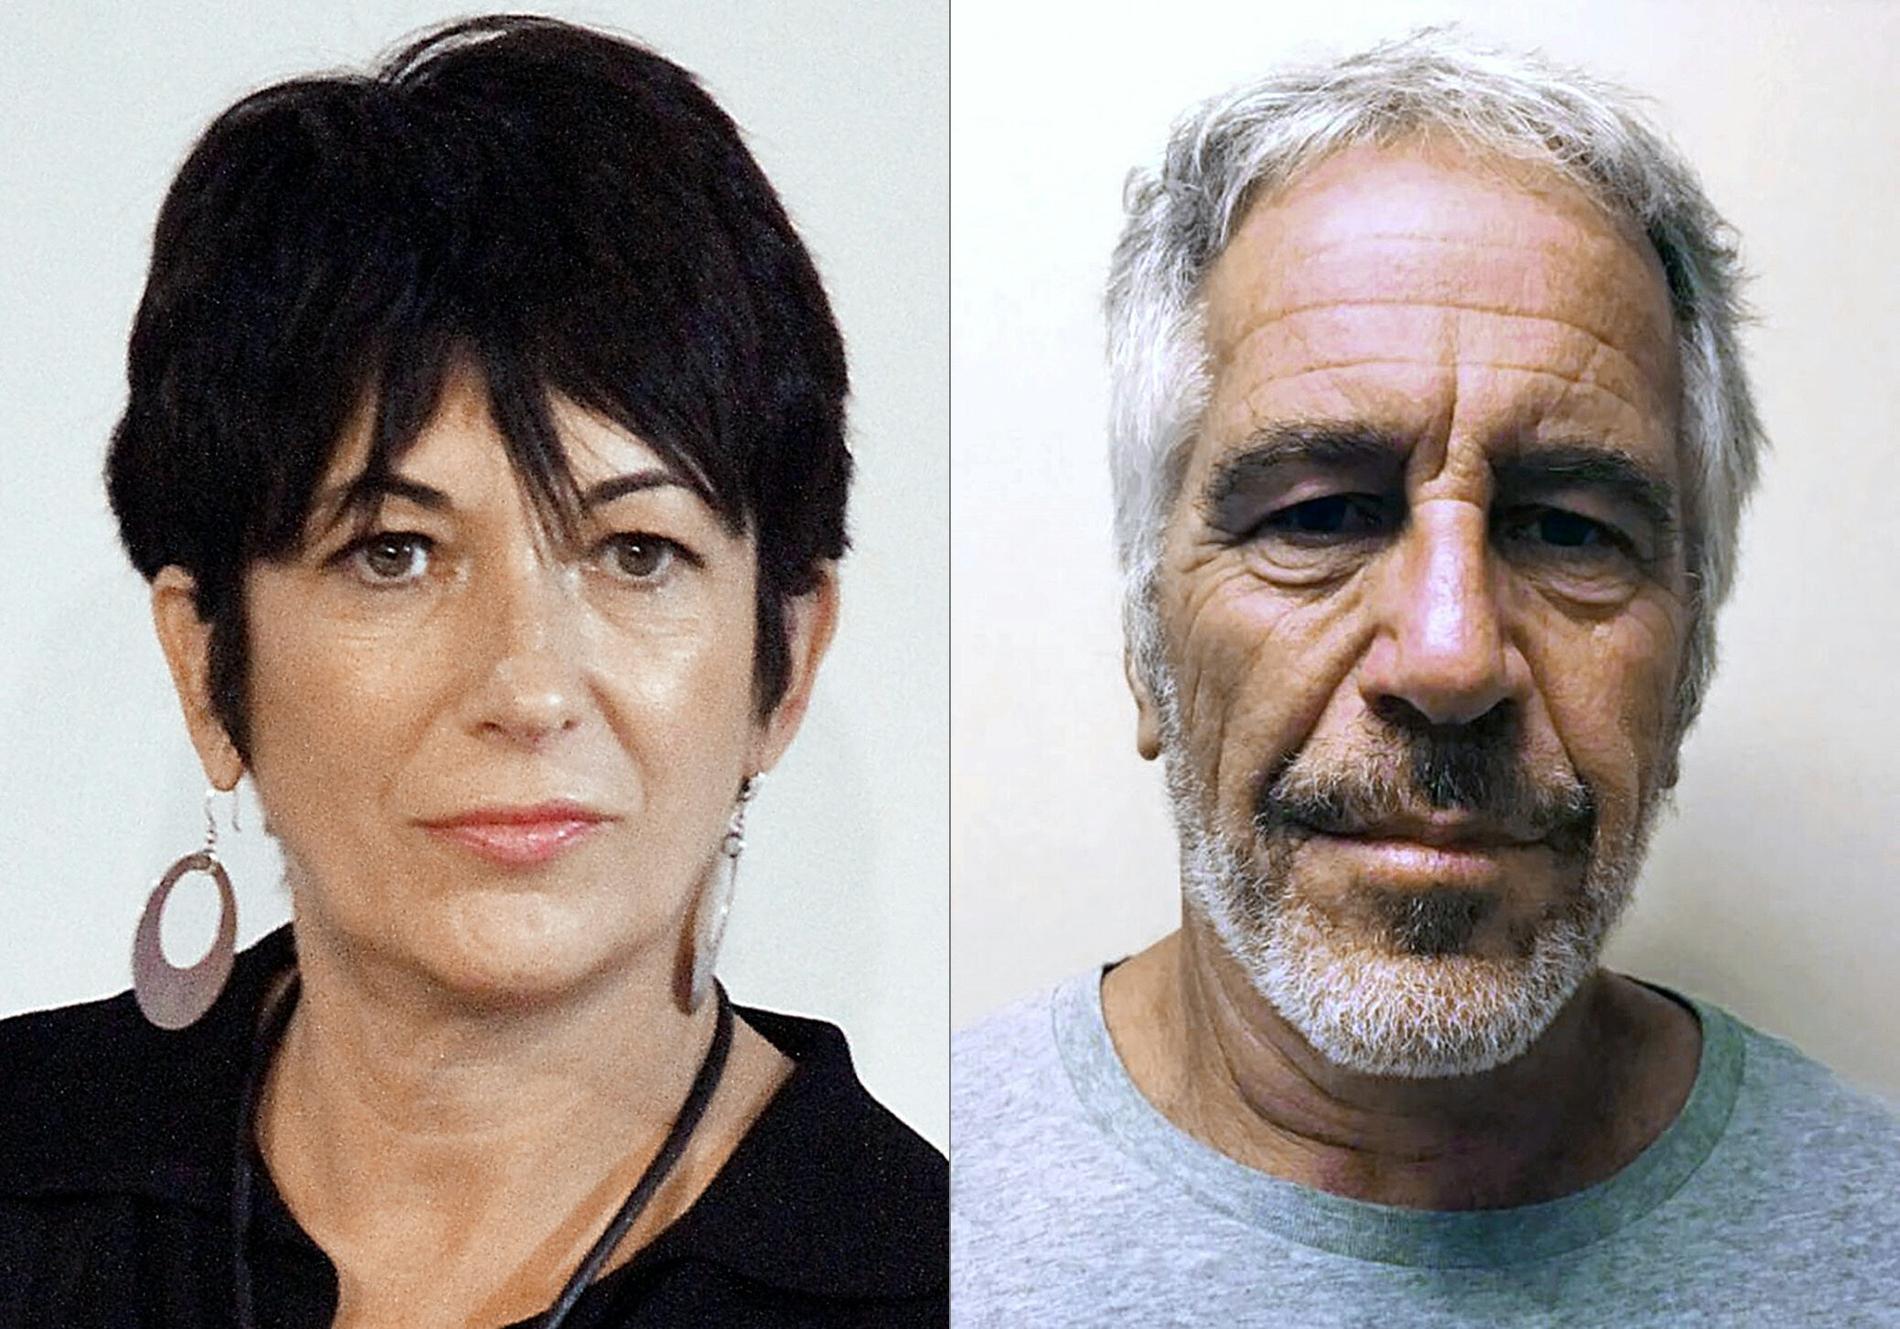 Partners: Since the two met in 1991, Ghislaine Maxwell is said to have played a role in Epstein's life as a lover, housekeeper, business partner and helicopter pilot.